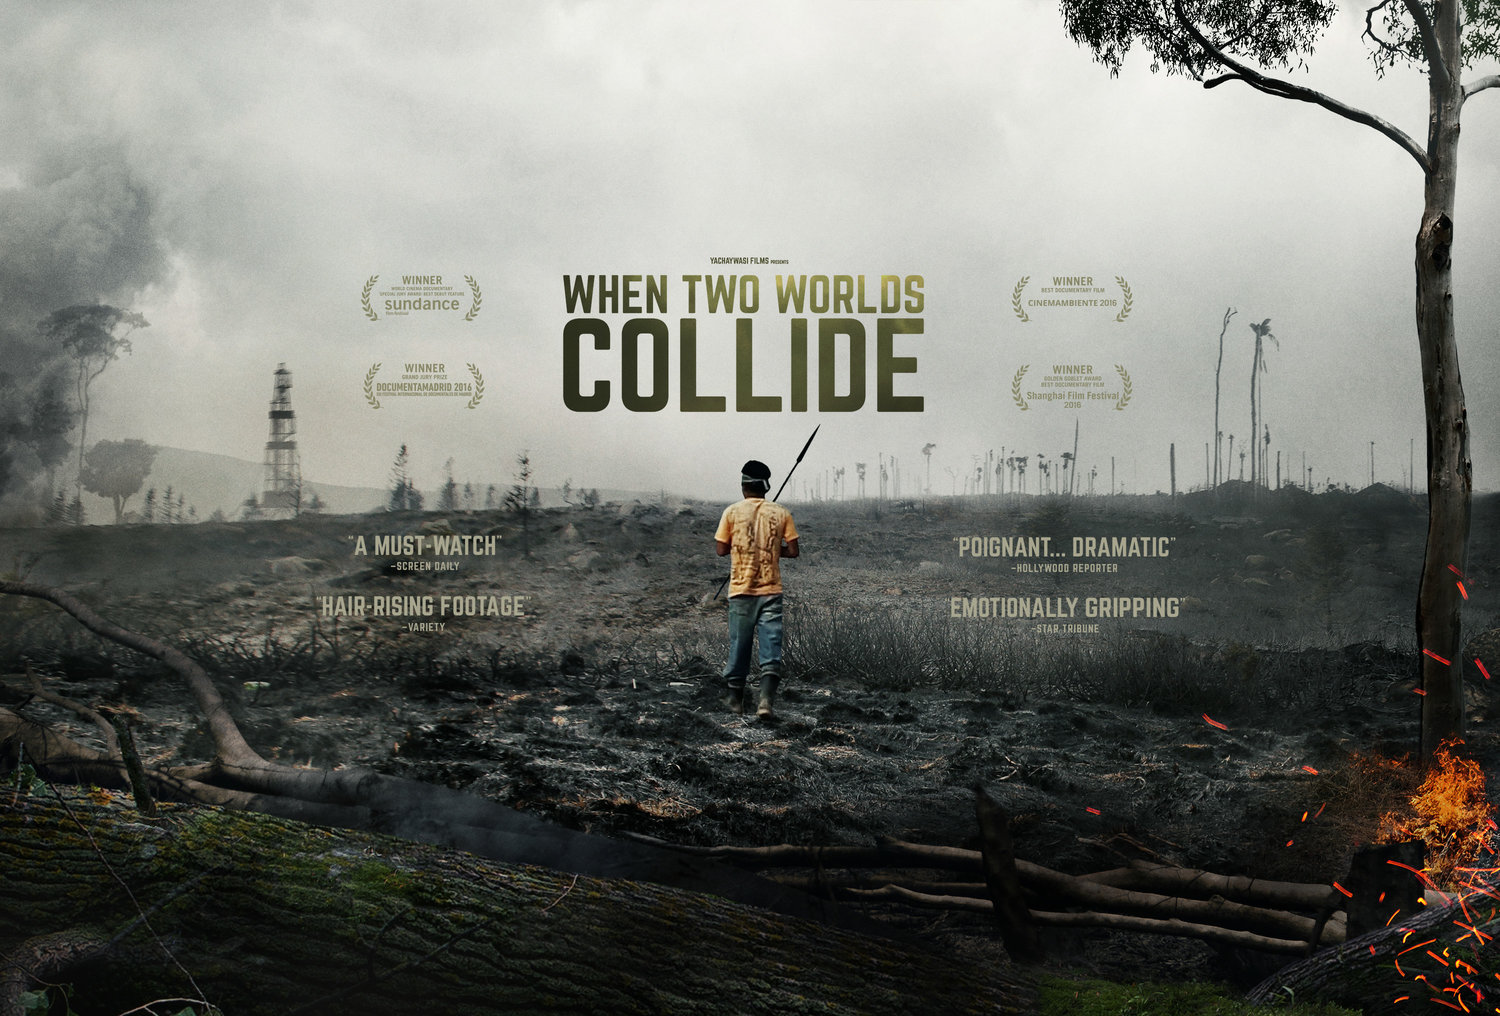 Screening and Discussion of When Two Worlds Collide